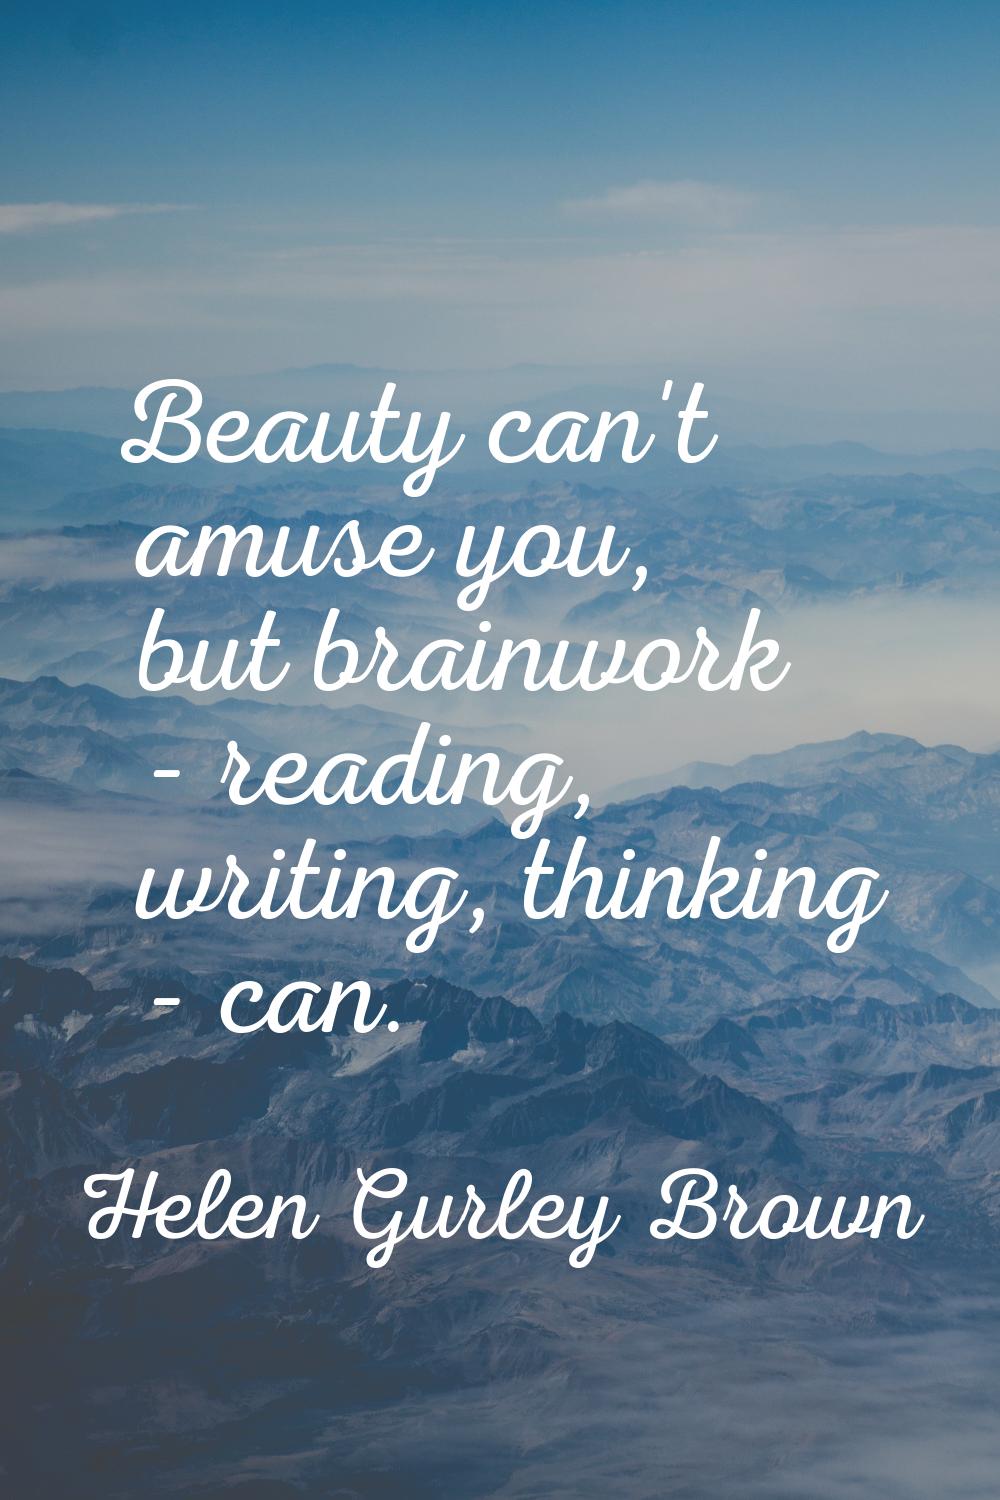 Beauty can't amuse you, but brainwork - reading, writing, thinking - can.